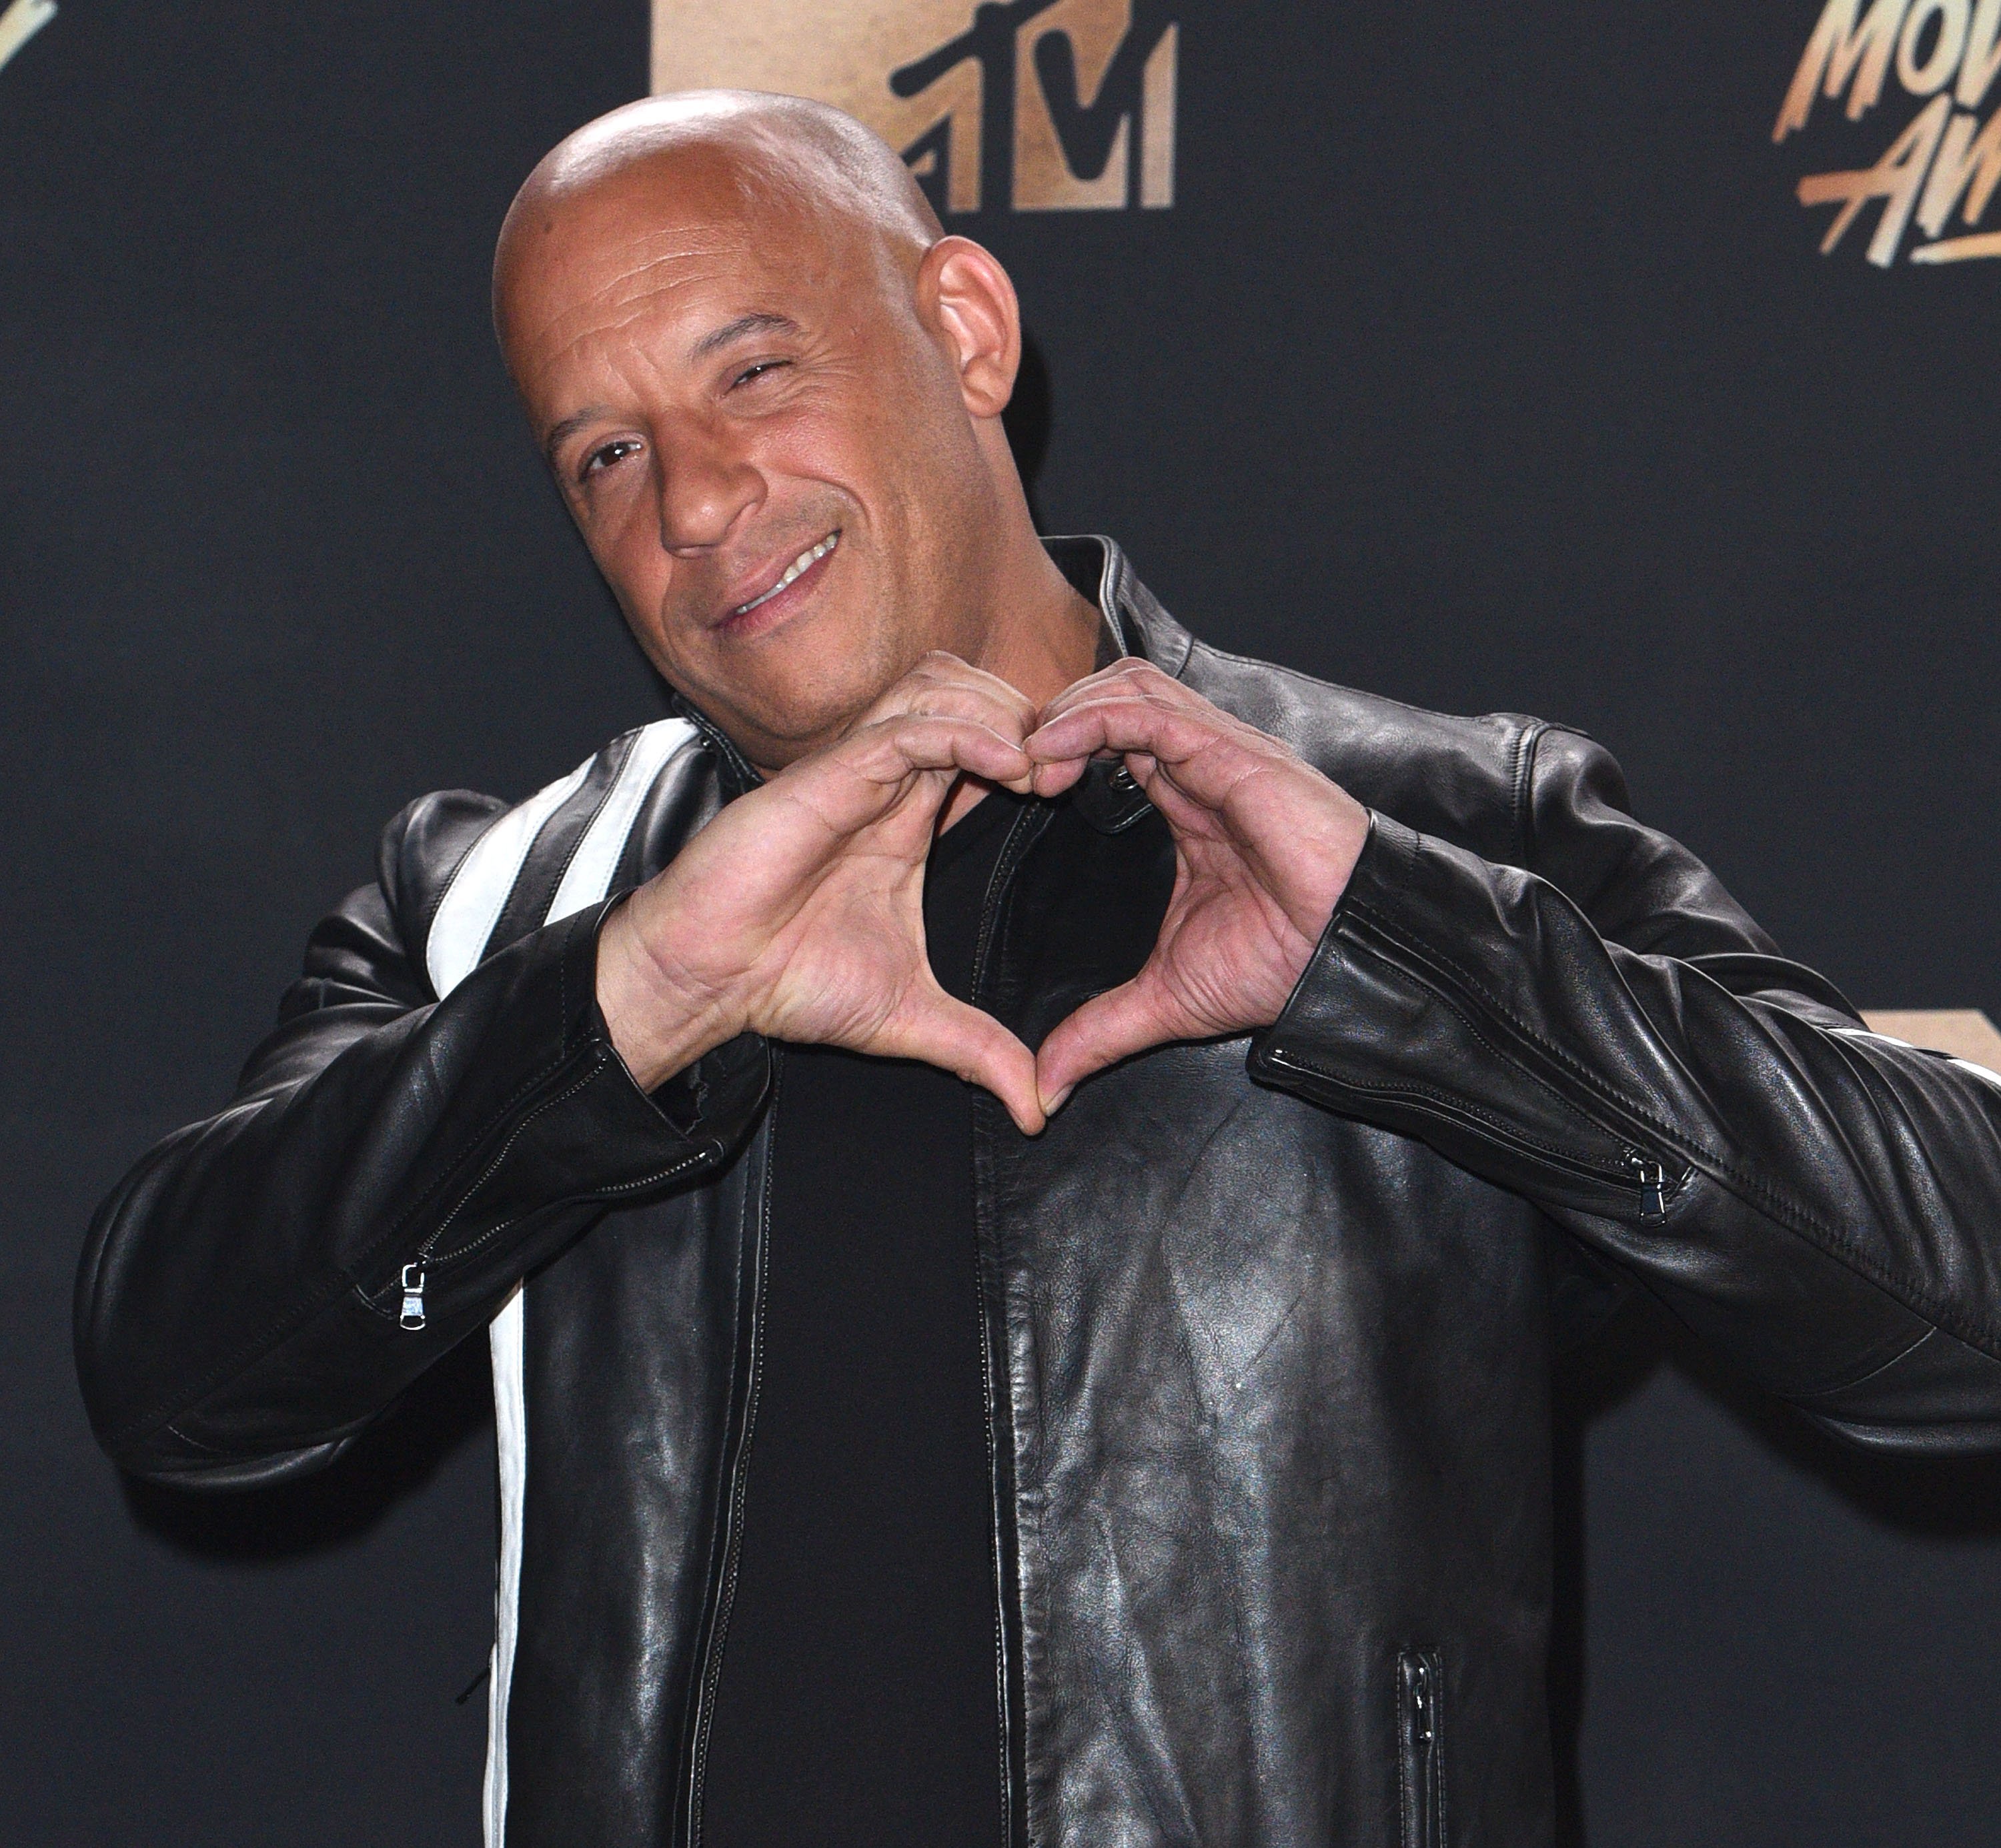 Vin Diesel poses in the press room at the 2017 MTV Movie and TV Awards at The Shrine Auditorium on May 7, 2017, in Los Angeles, California. | Source: Getty Images.